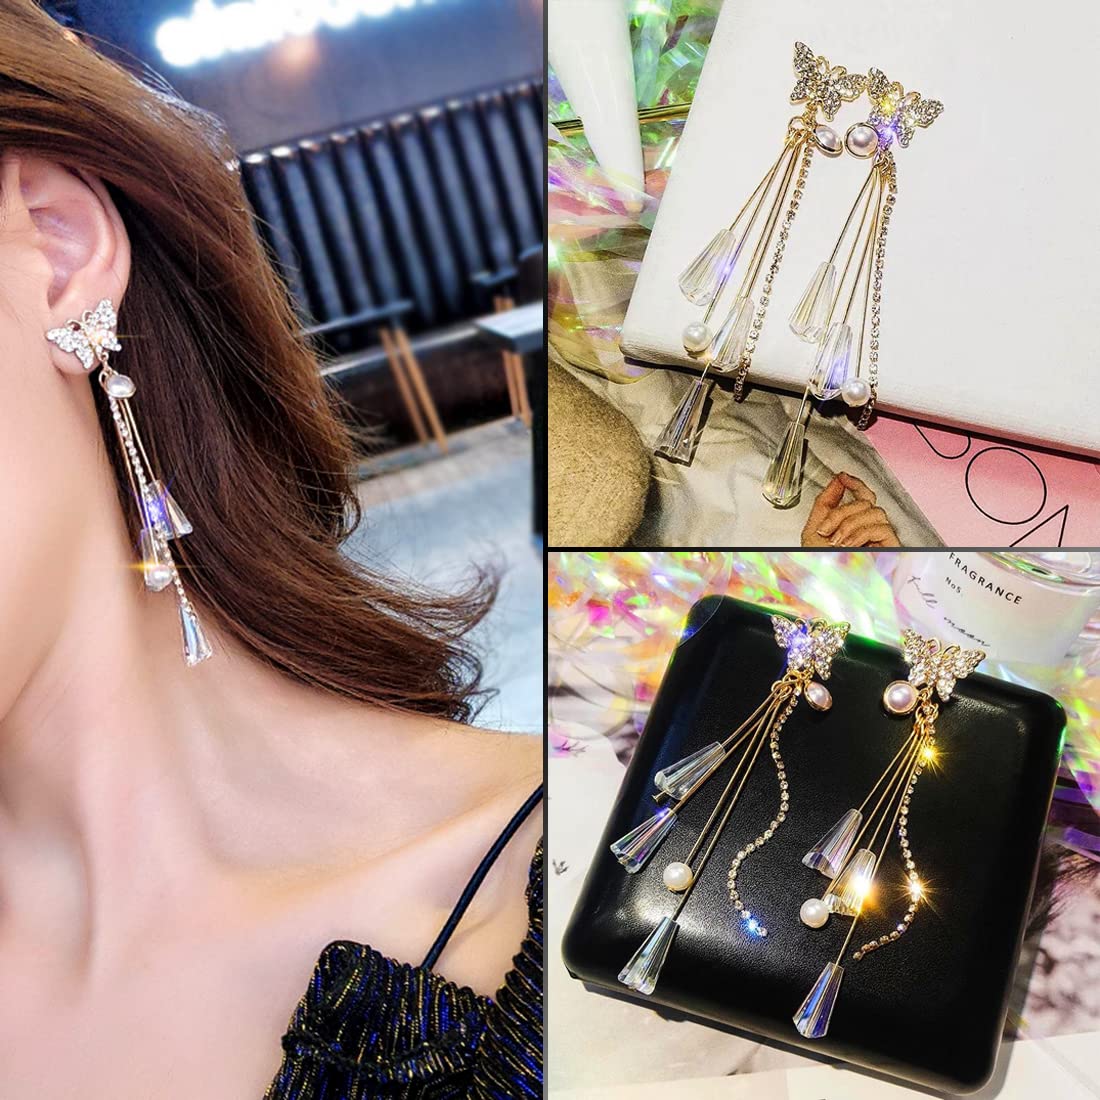 Yellow Chimes Women and Girls Fashion Gold Crystal Stoned Long Dangler Earring with Hanging Pearls Butterfly Shaped Western Dangler Accessories Jewellery